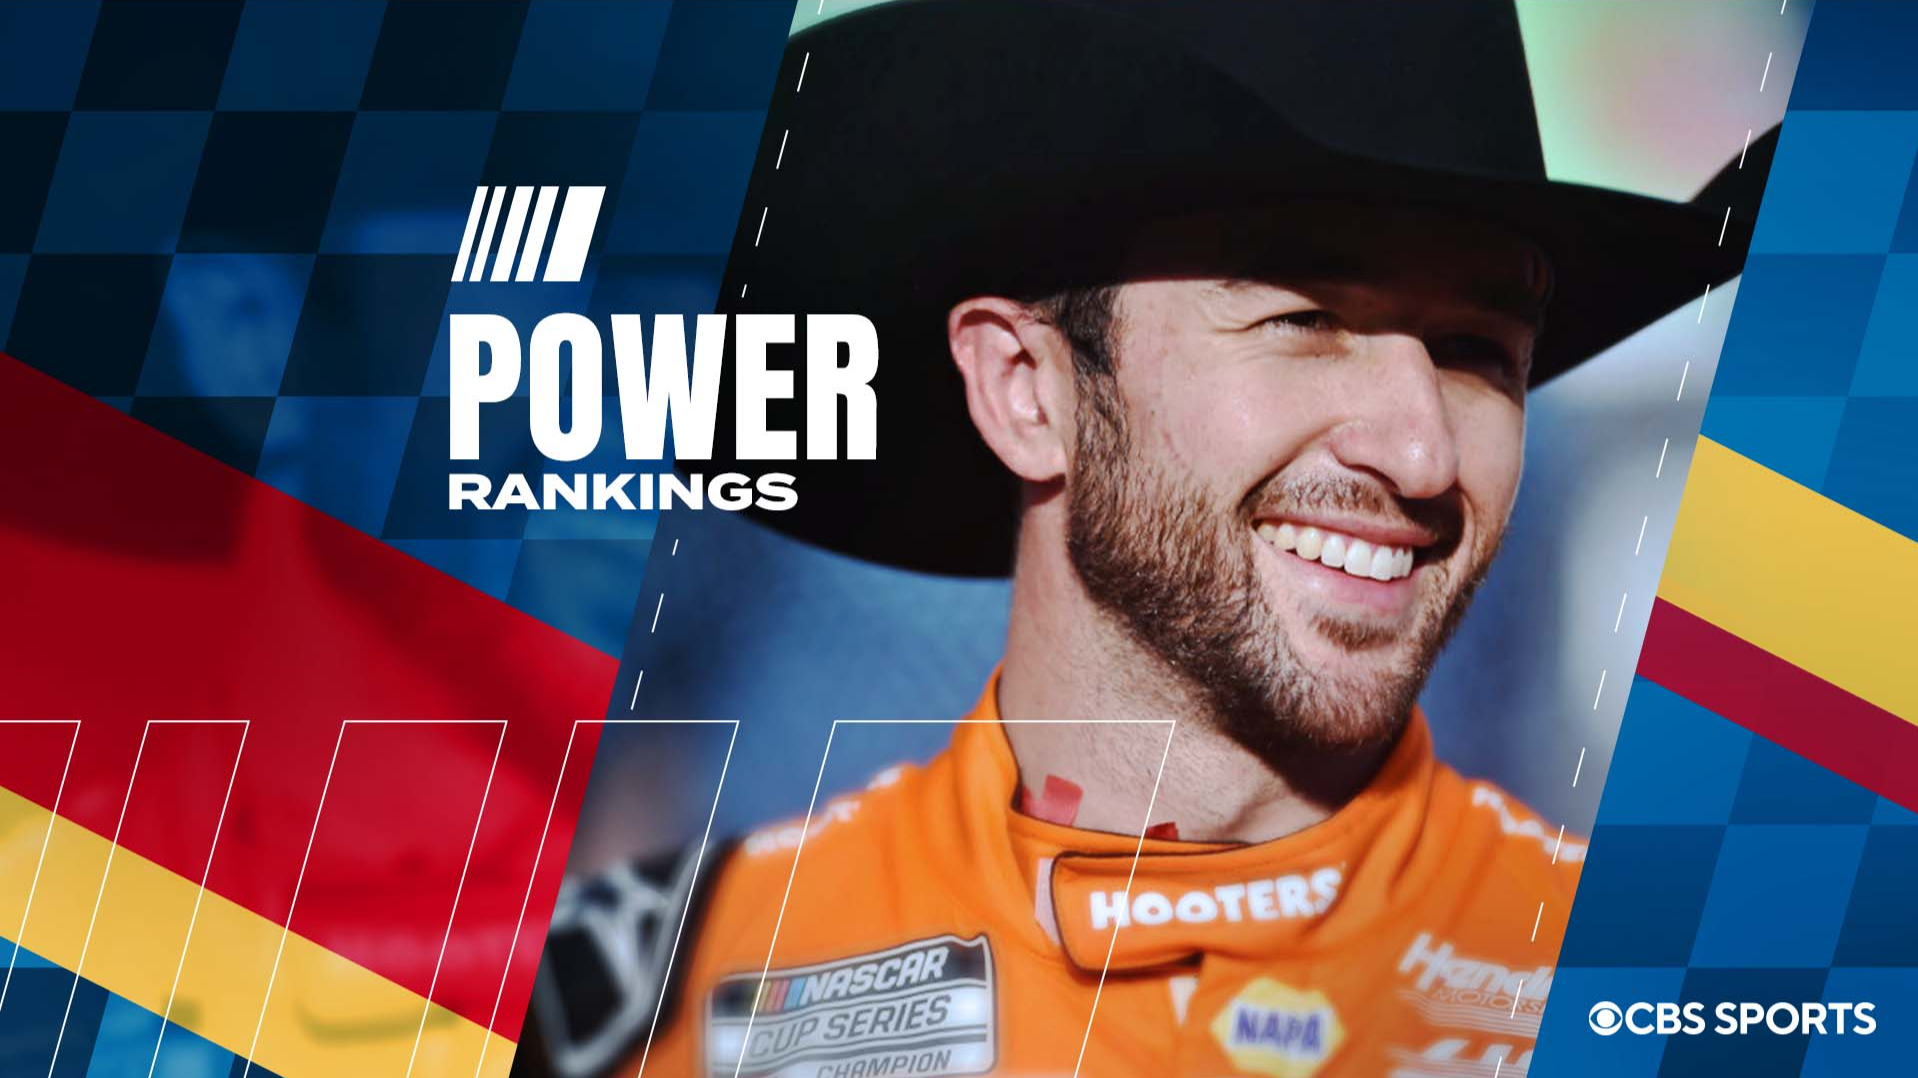 NASCAR Power Rankings: Chase Elliott moves into top three after big win in Texas